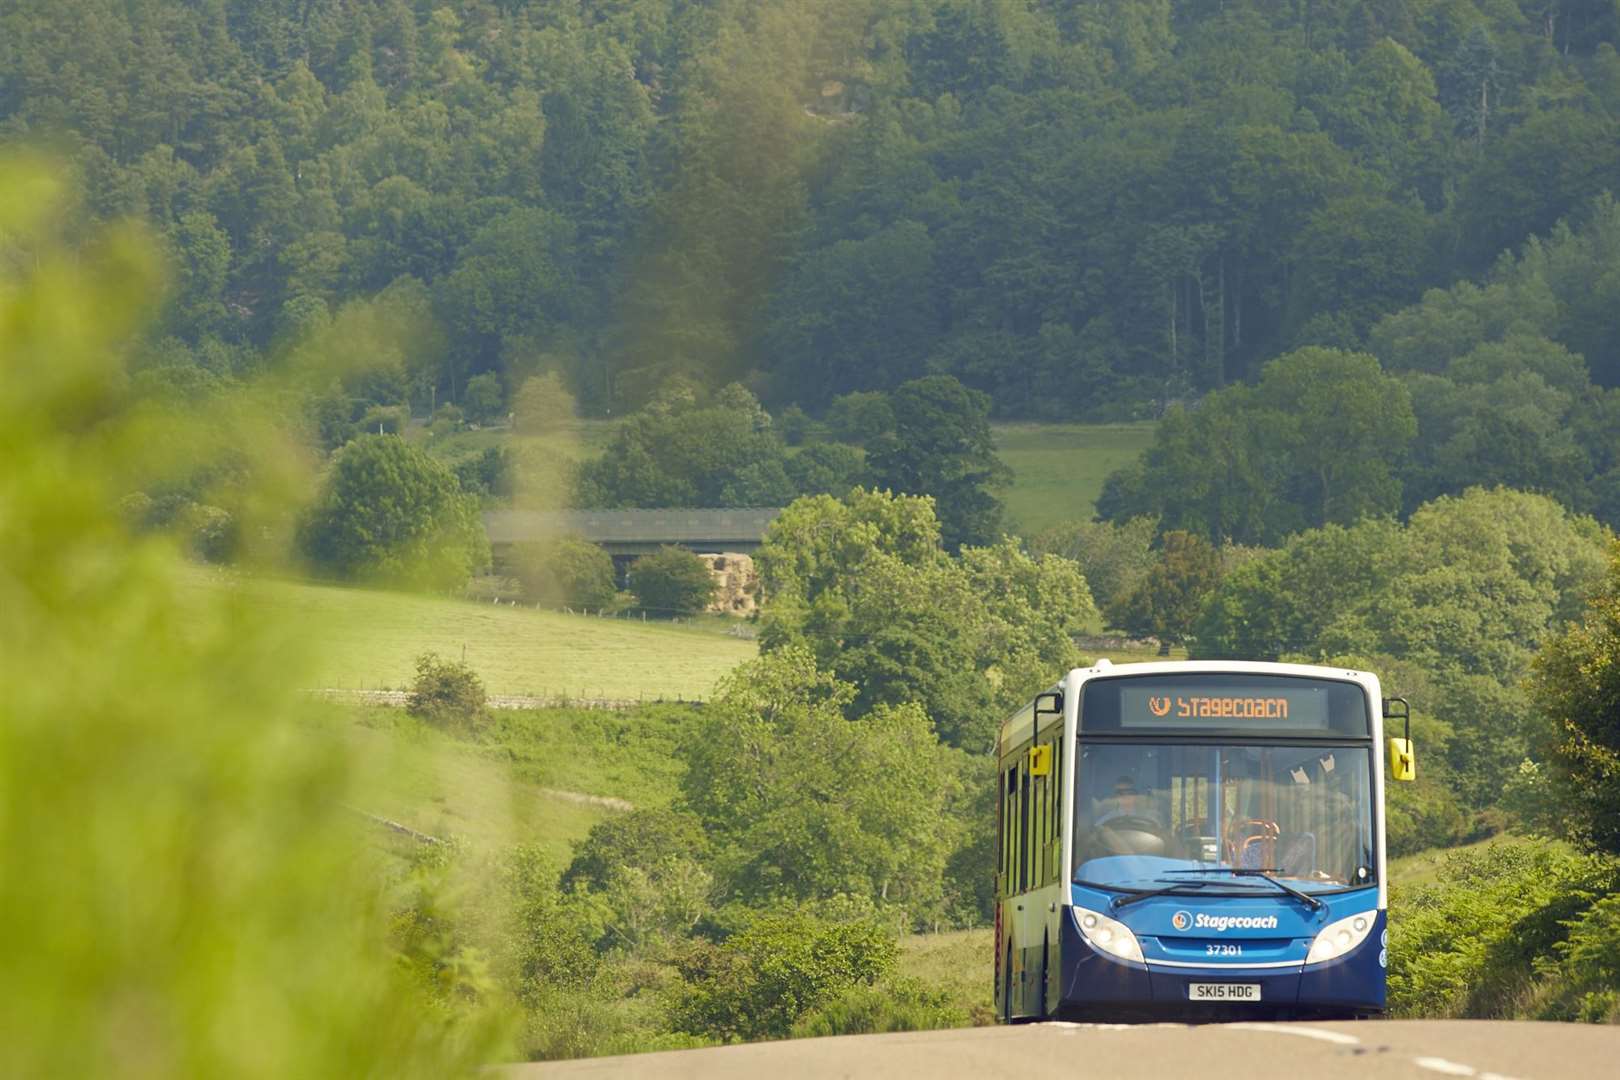 Stagecoach has a number of extra measures in place to ensure its services are Covid-19 secure.